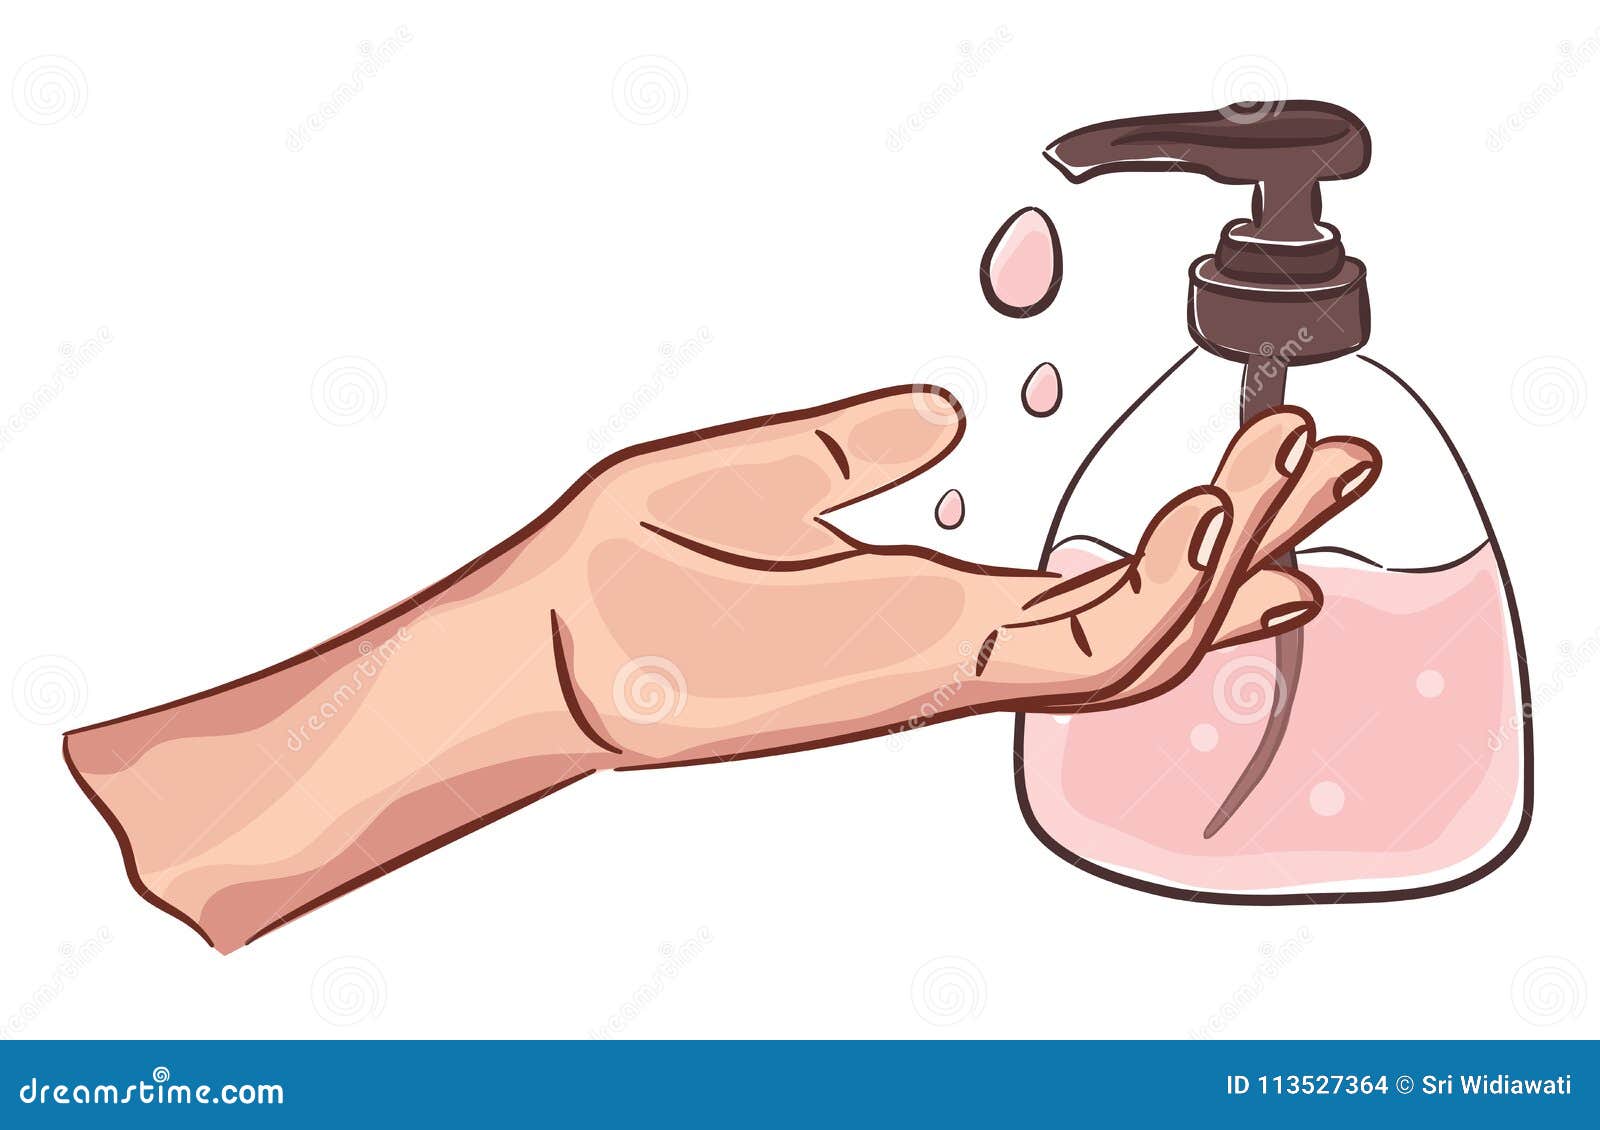 Wash Your Hands. Vector Illustration. Hand Drawing. Hand Washing. Drawing  in Cartoon Style Stock Illustration - Illustration of flat, clean: 176739130